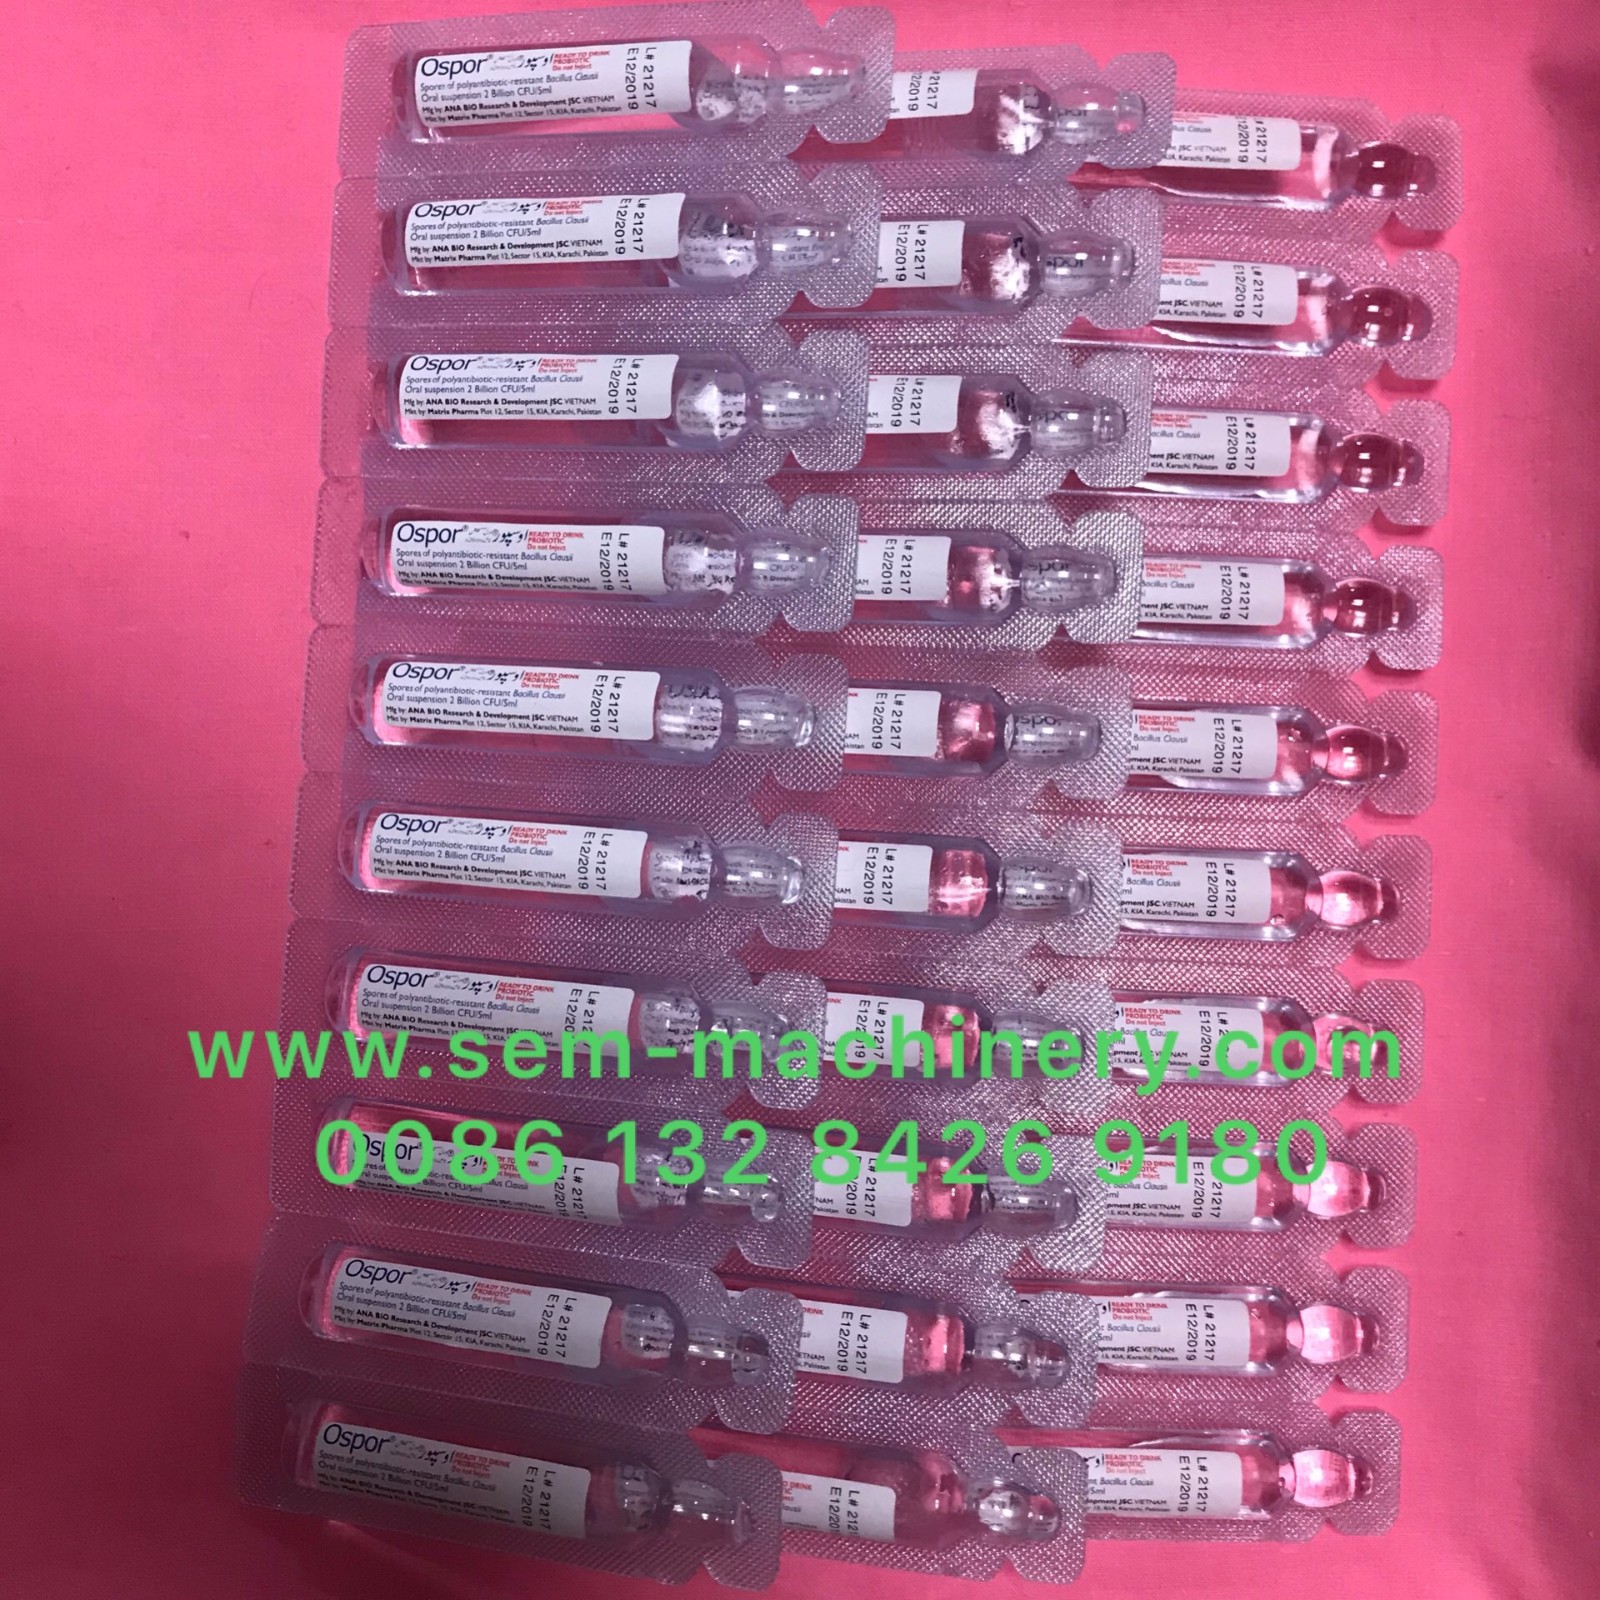 plastic ampoule filling and sealing machine